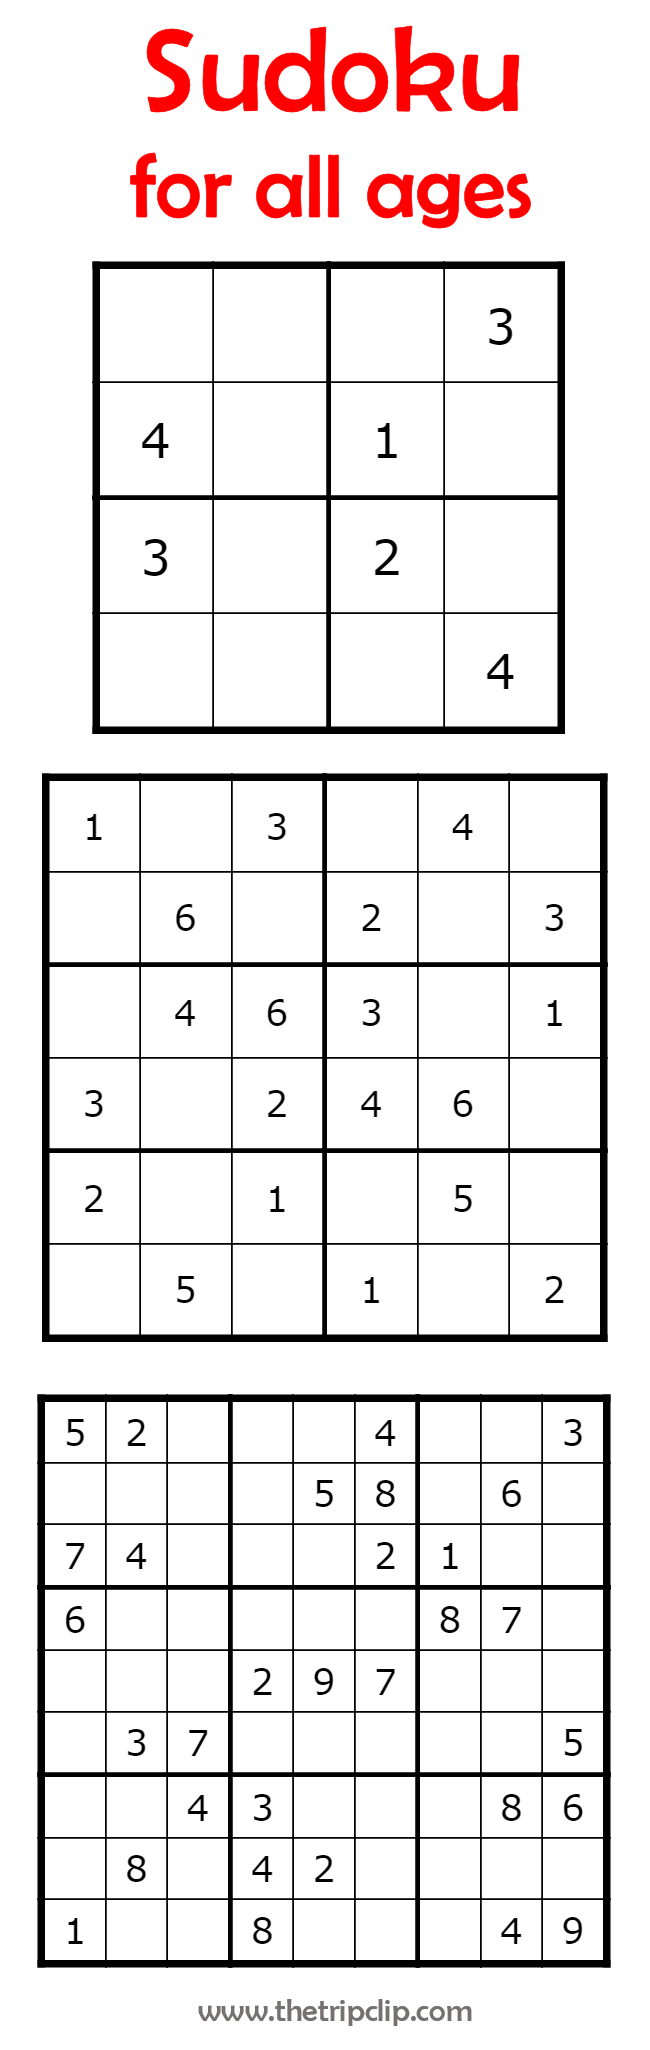 Sudoku For All Ages Plus Lots Of Other Printable Activities For Kids - Printable Sudoku Puzzles 4X4